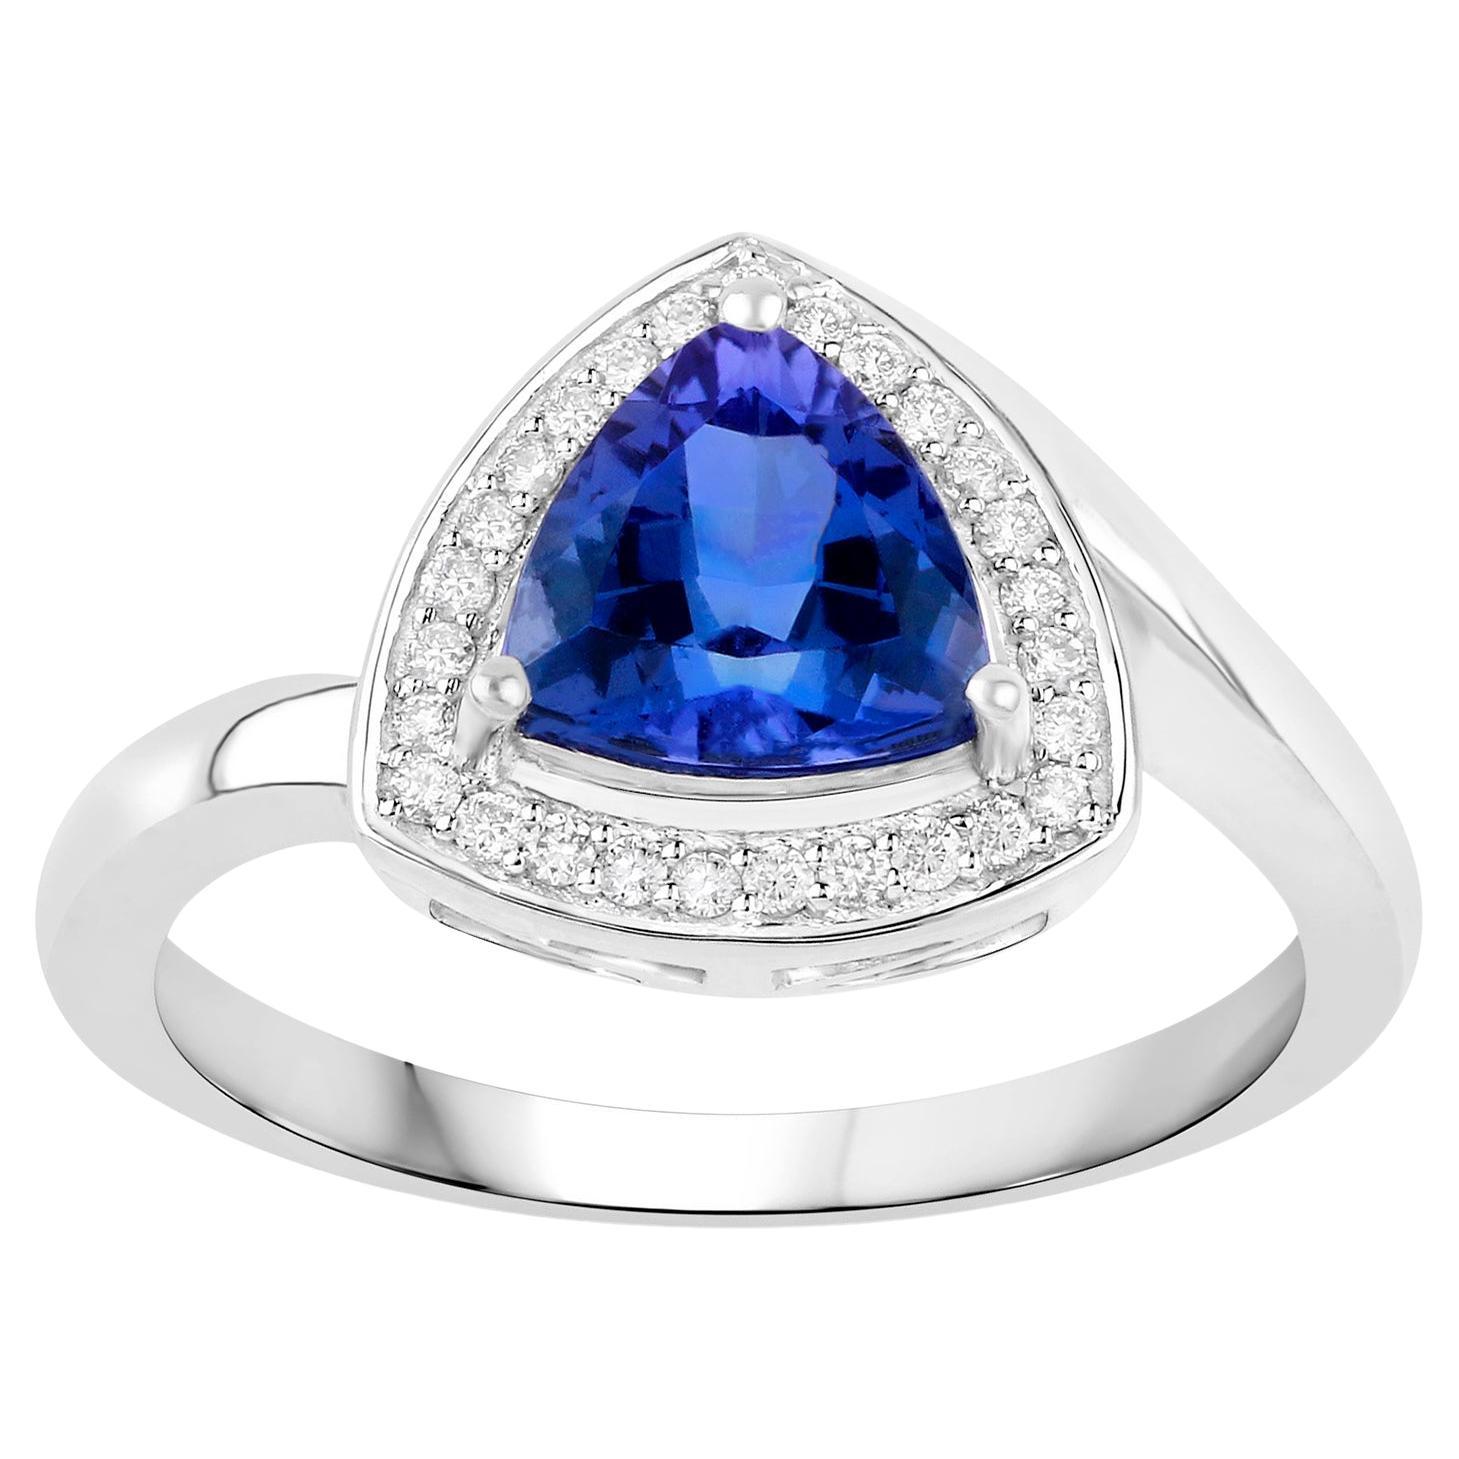 Tanzanite Ring With Diamonds 1.48 Carats 14K White Gold For Sale